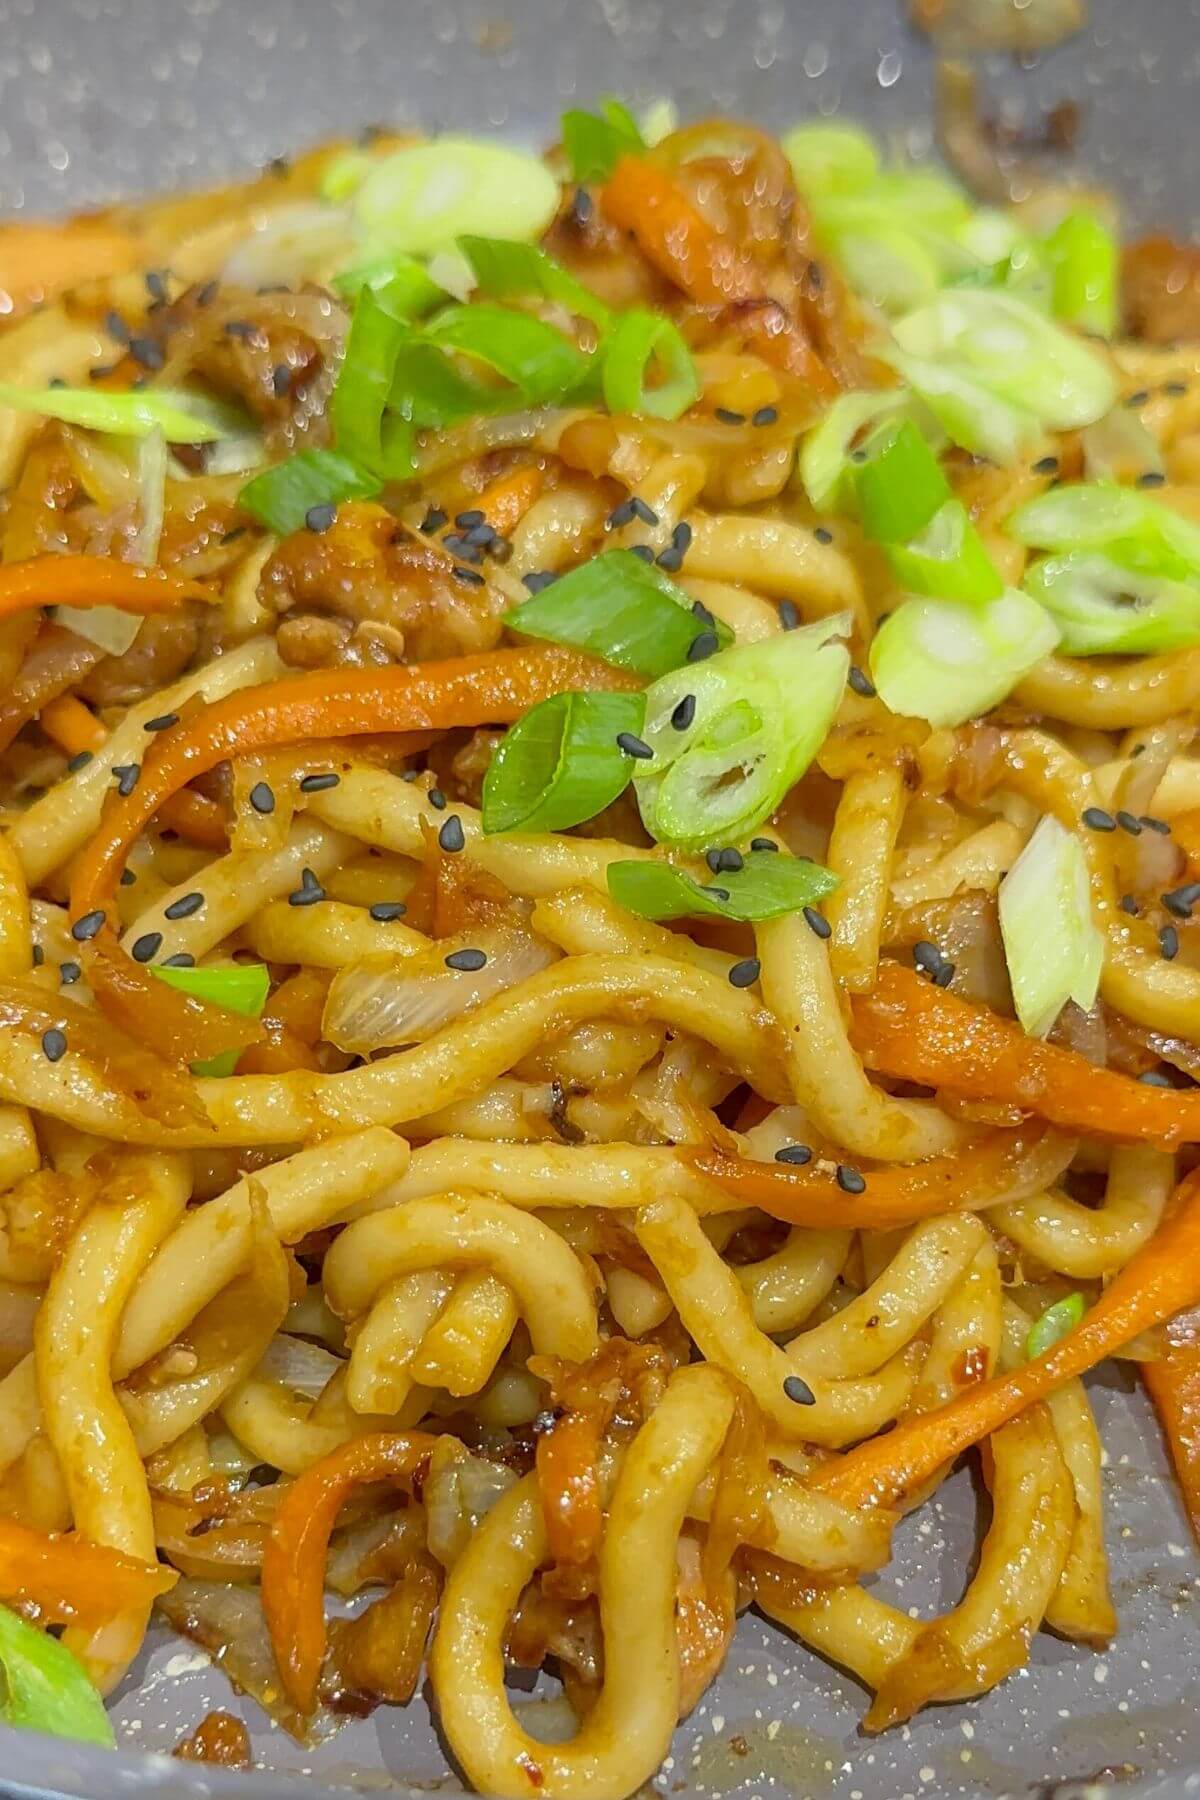 Udon noodles with teriyaki chicken in a pan, topped with green onions and sesame seeds.